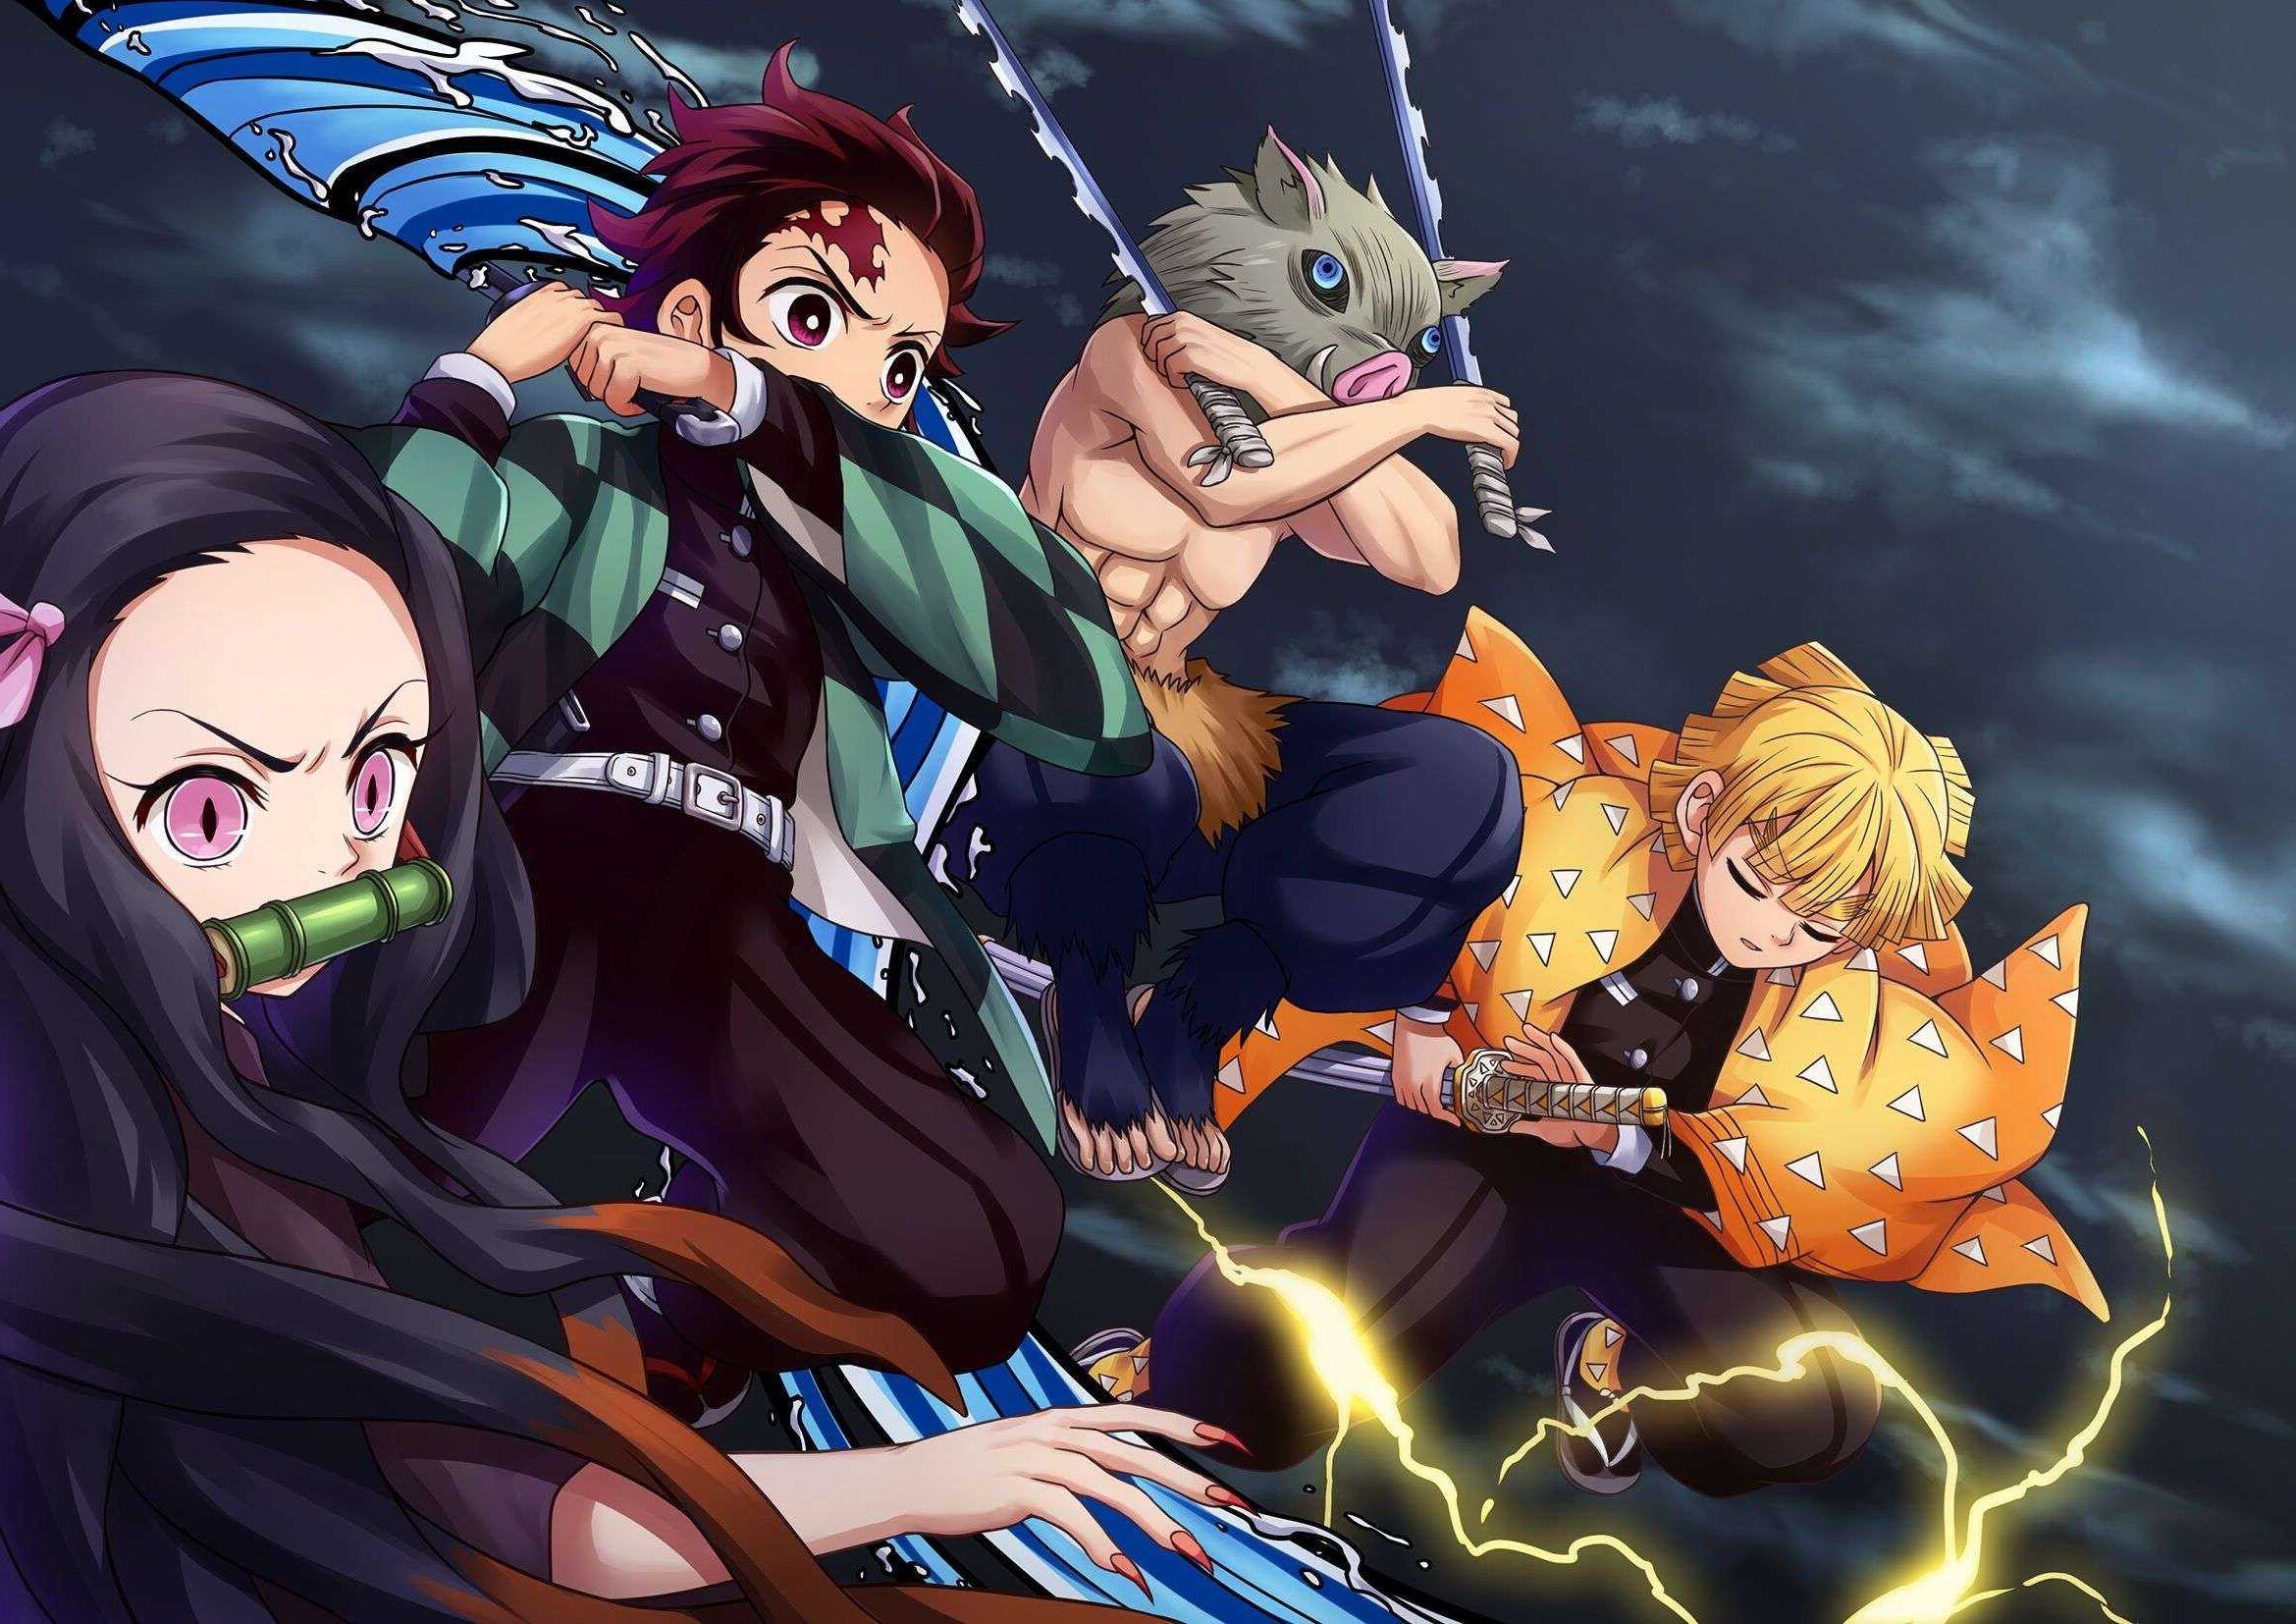 Demon Slayer Kimetsu no Yaiba wallpaper 100140 with high-resolution 1920x1080 pixel. You can use this wallpaper for your Windows and Mac OS computers as well as your Android and iPhone smartphones - Demon Slayer